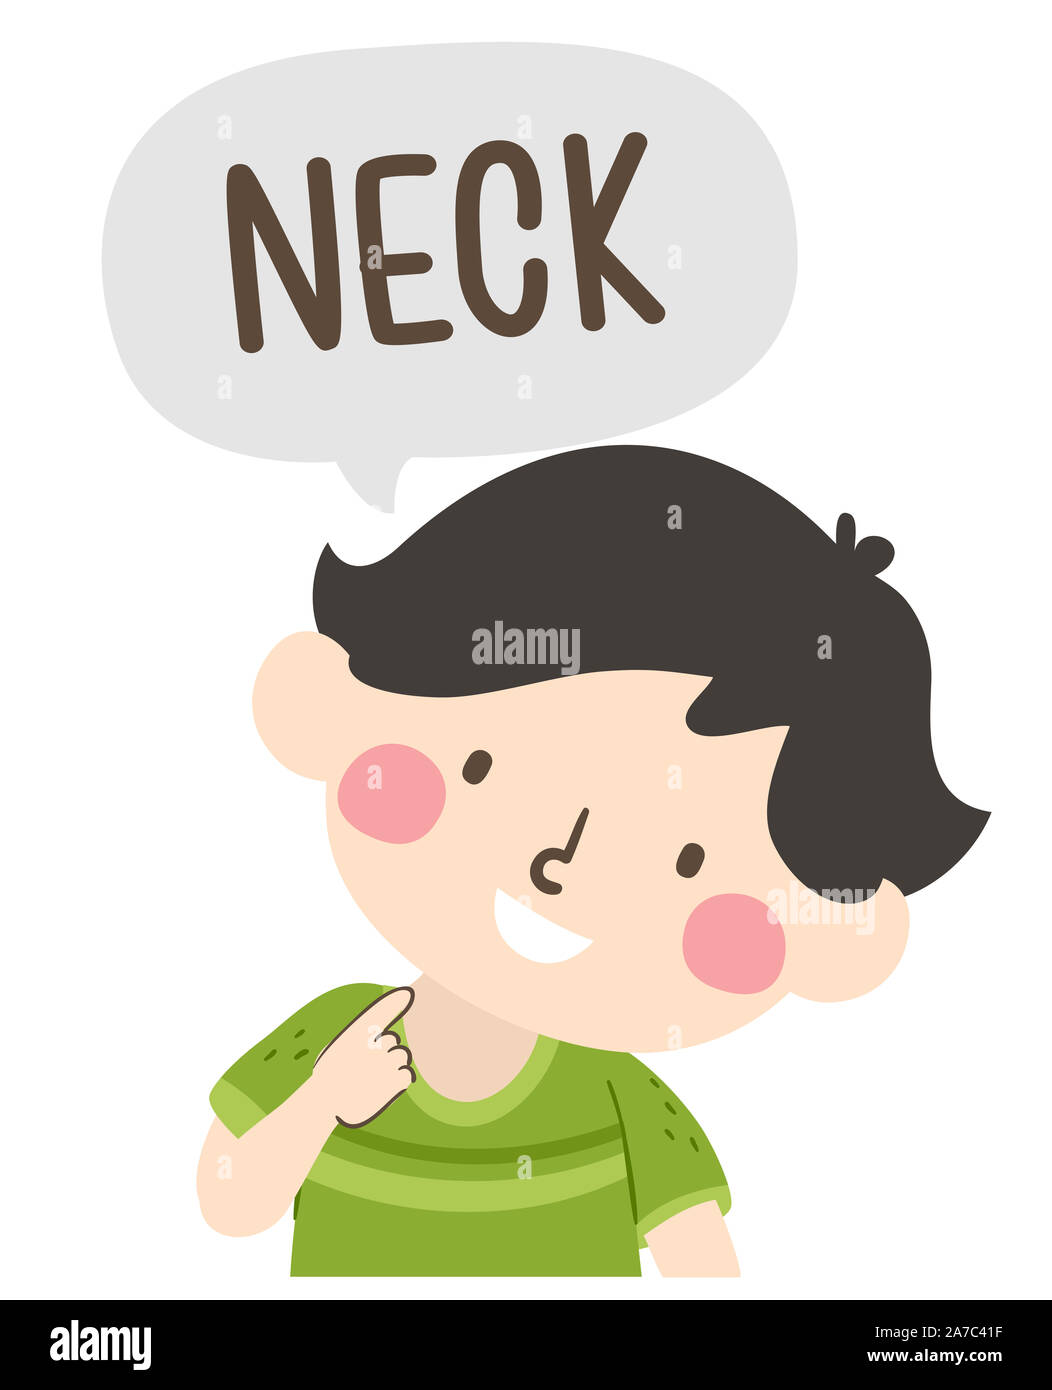 Illustration of a Kid Boy Pointing to and Saying Neck with His Head Tilted  as Part of Naming Body Parts Series Stock Photo - Alamy